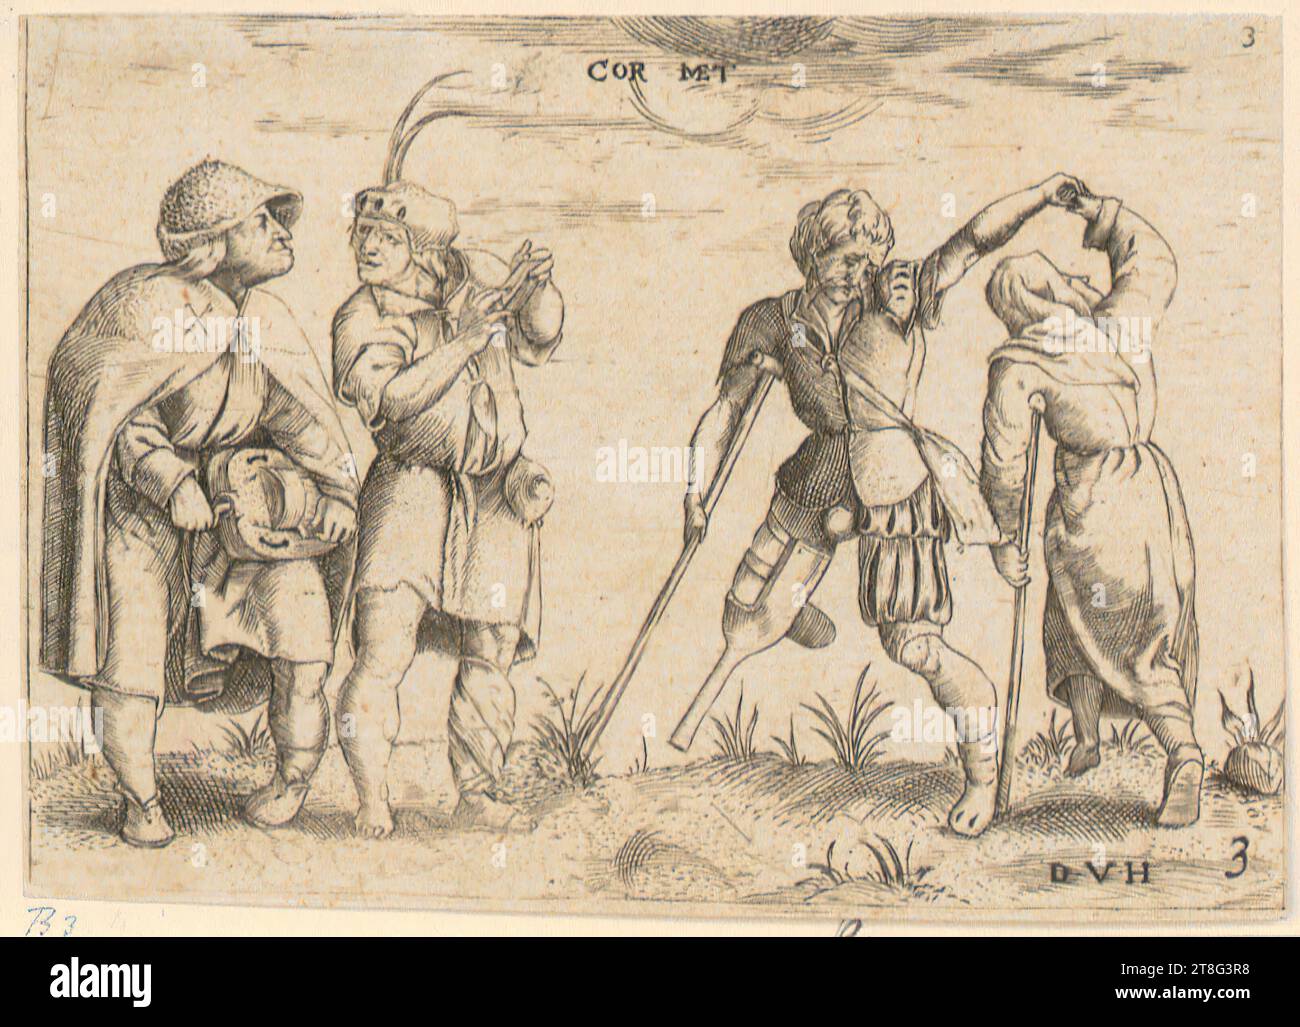 Dirck van Hoogstraten (1596 c. - 1640)Cornelis Massys (1510 c. - c. 1557), copy after, A dancing beggar couple and two musicians, sheet of the series 'Beggars', origin of the print: 1606 - 1640, copperplate engraving, sheet size: 6.4 x 9.0 cm, top center inscribed 'COR MET'; top right numbered '3'; bottom right monogrammed and numbered Stock Photo